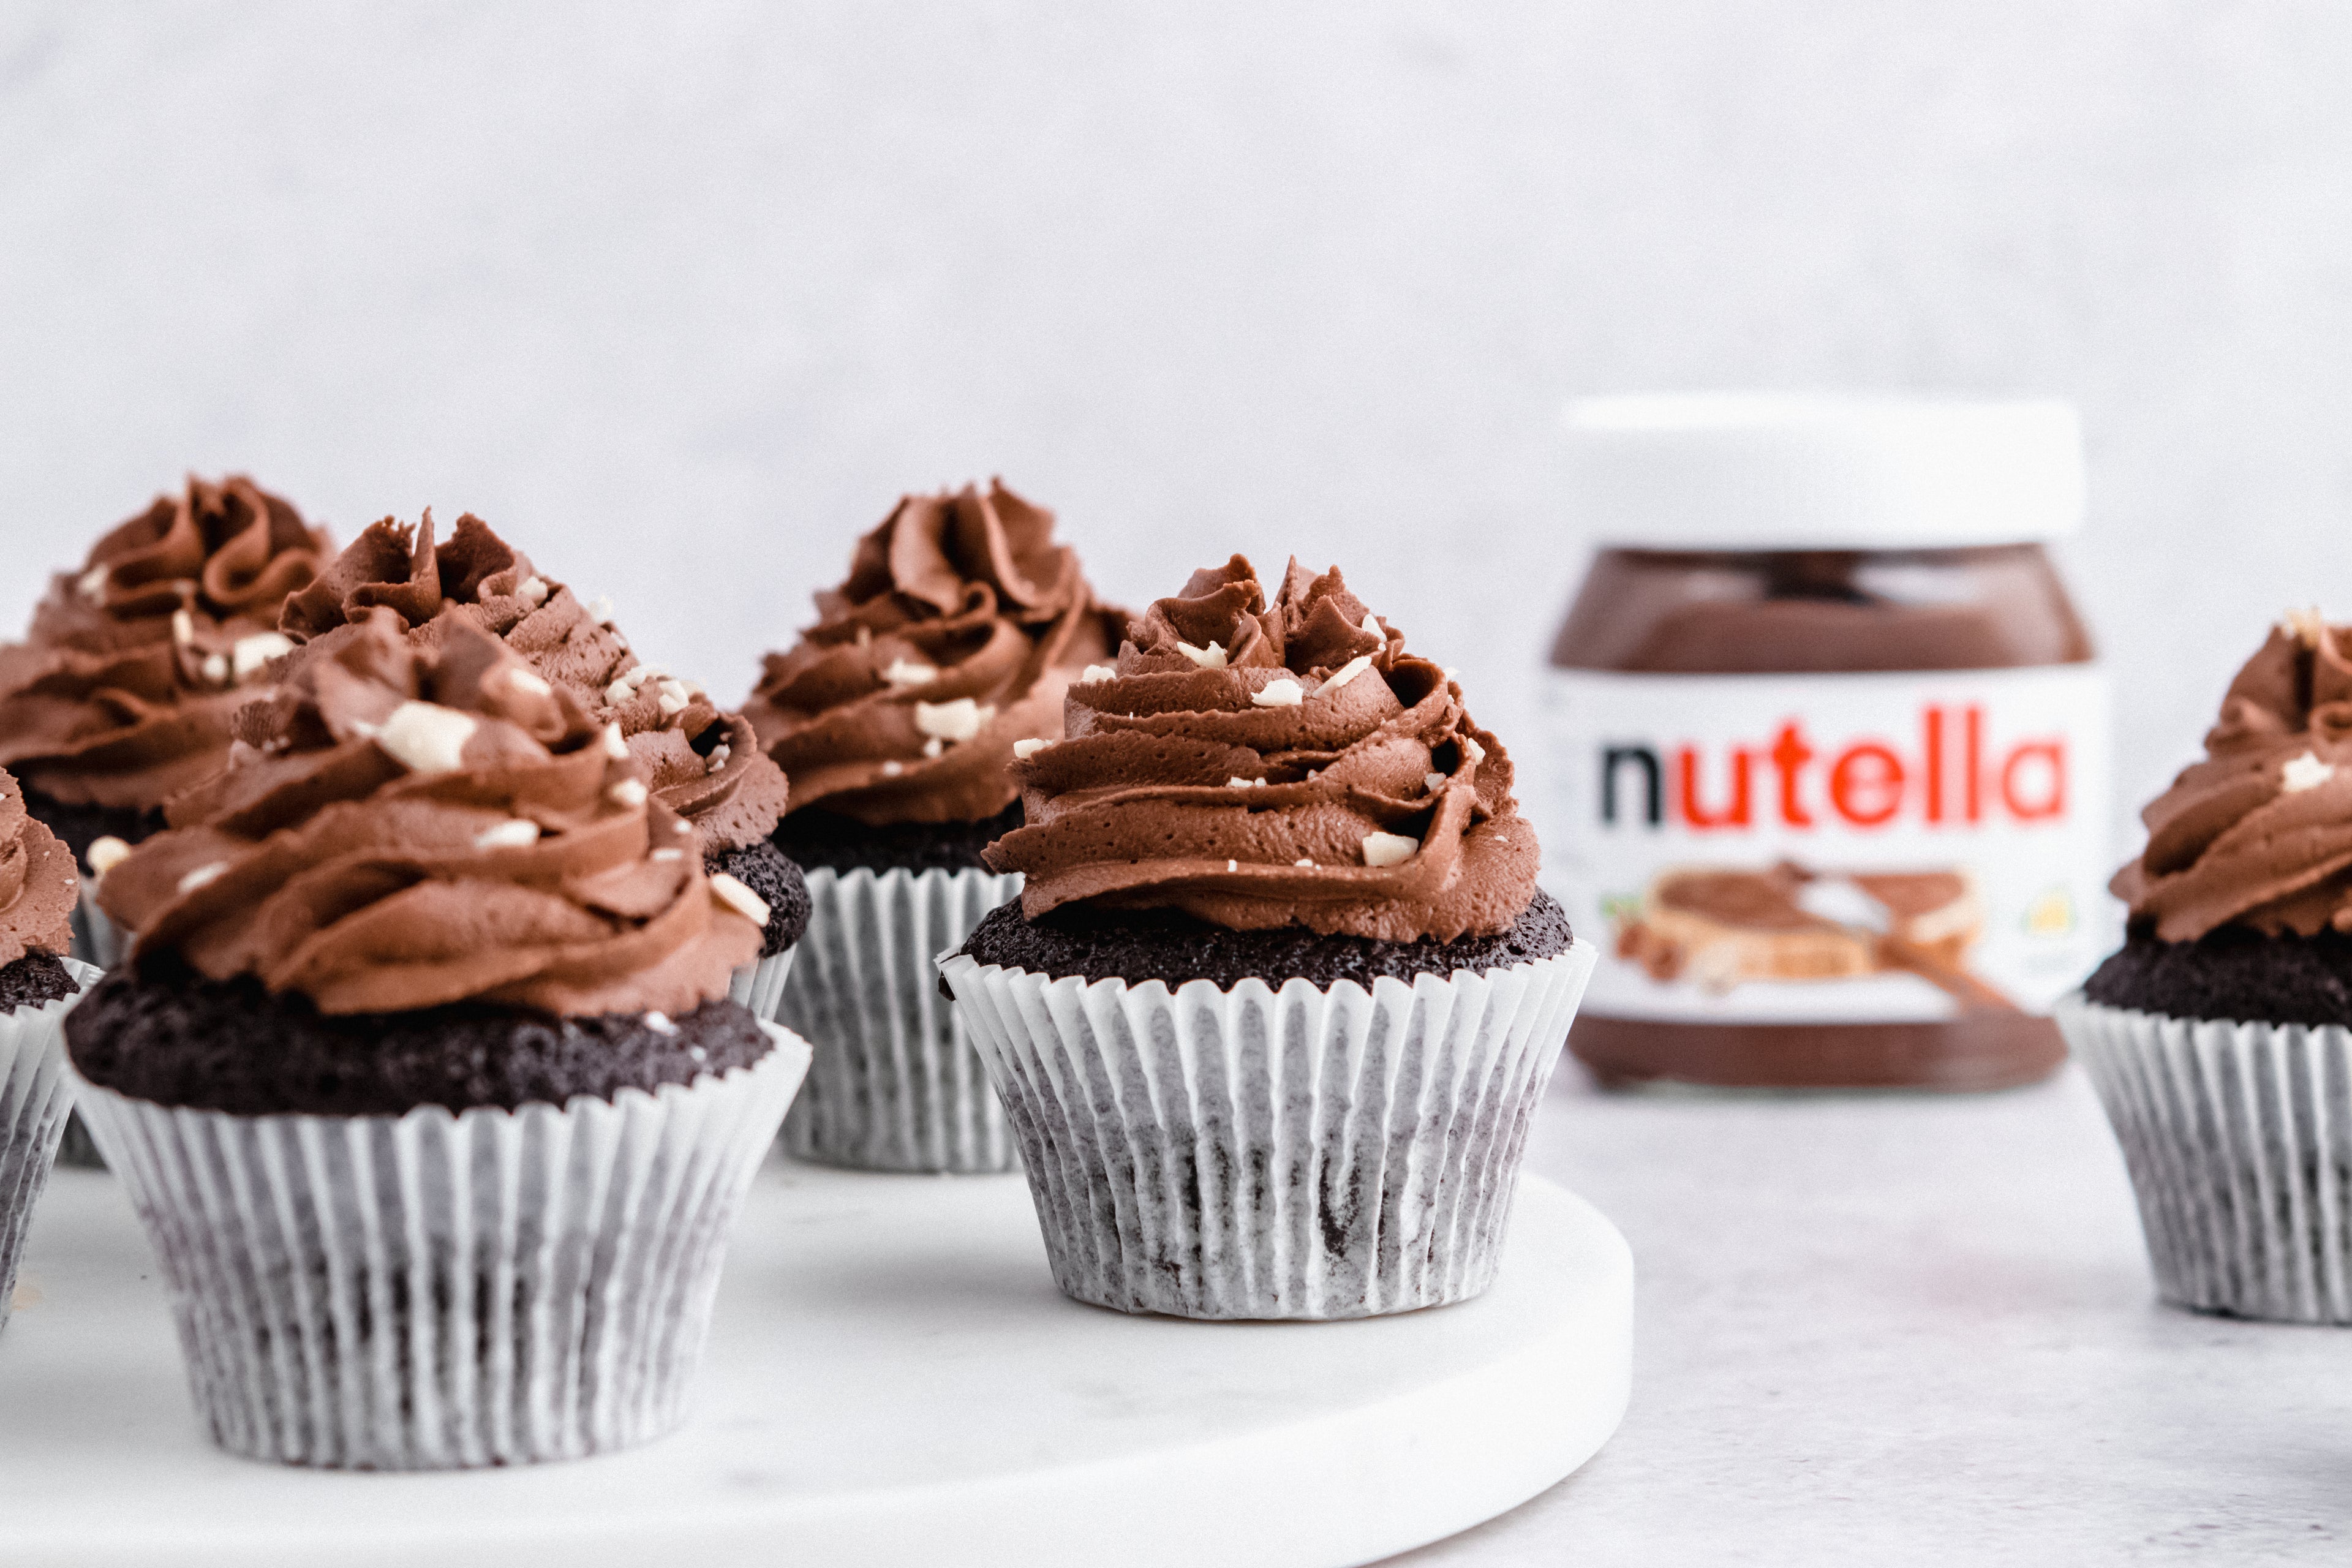 Nutella cupcakes on a marble tray, with a jar of Nutella in the background